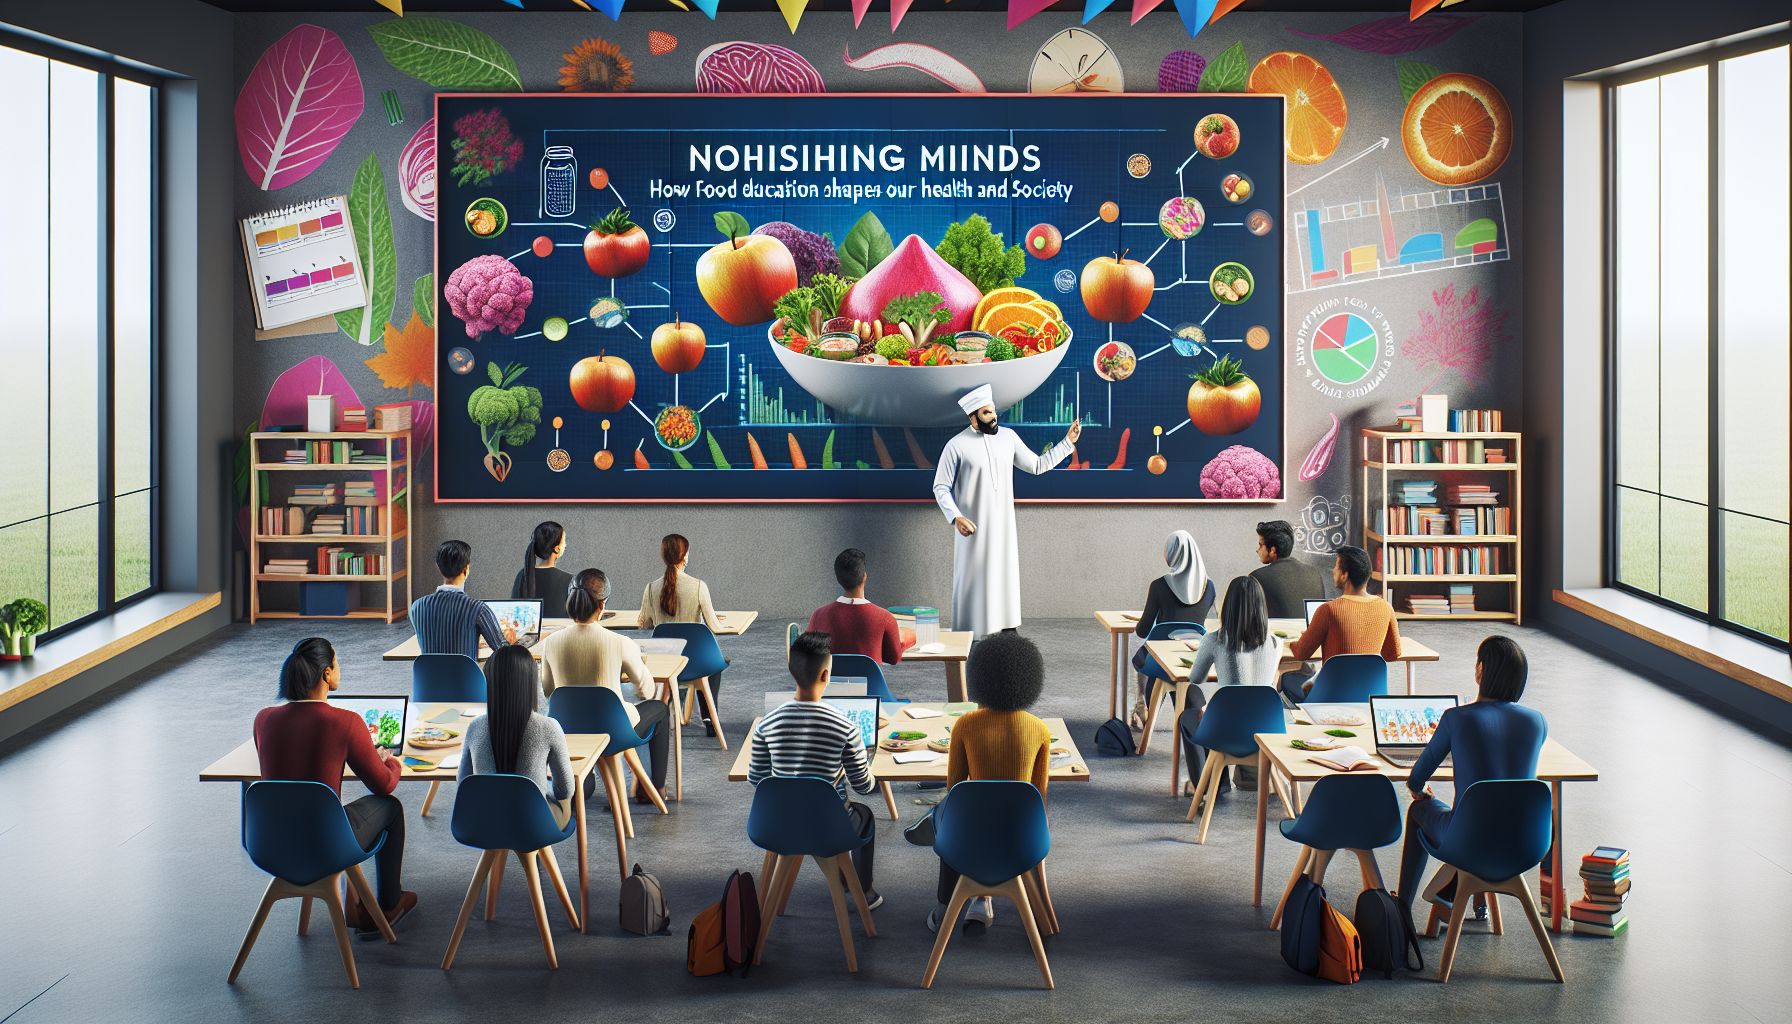 Nourishing Minds: How Food Education Shapes Our Health and Society